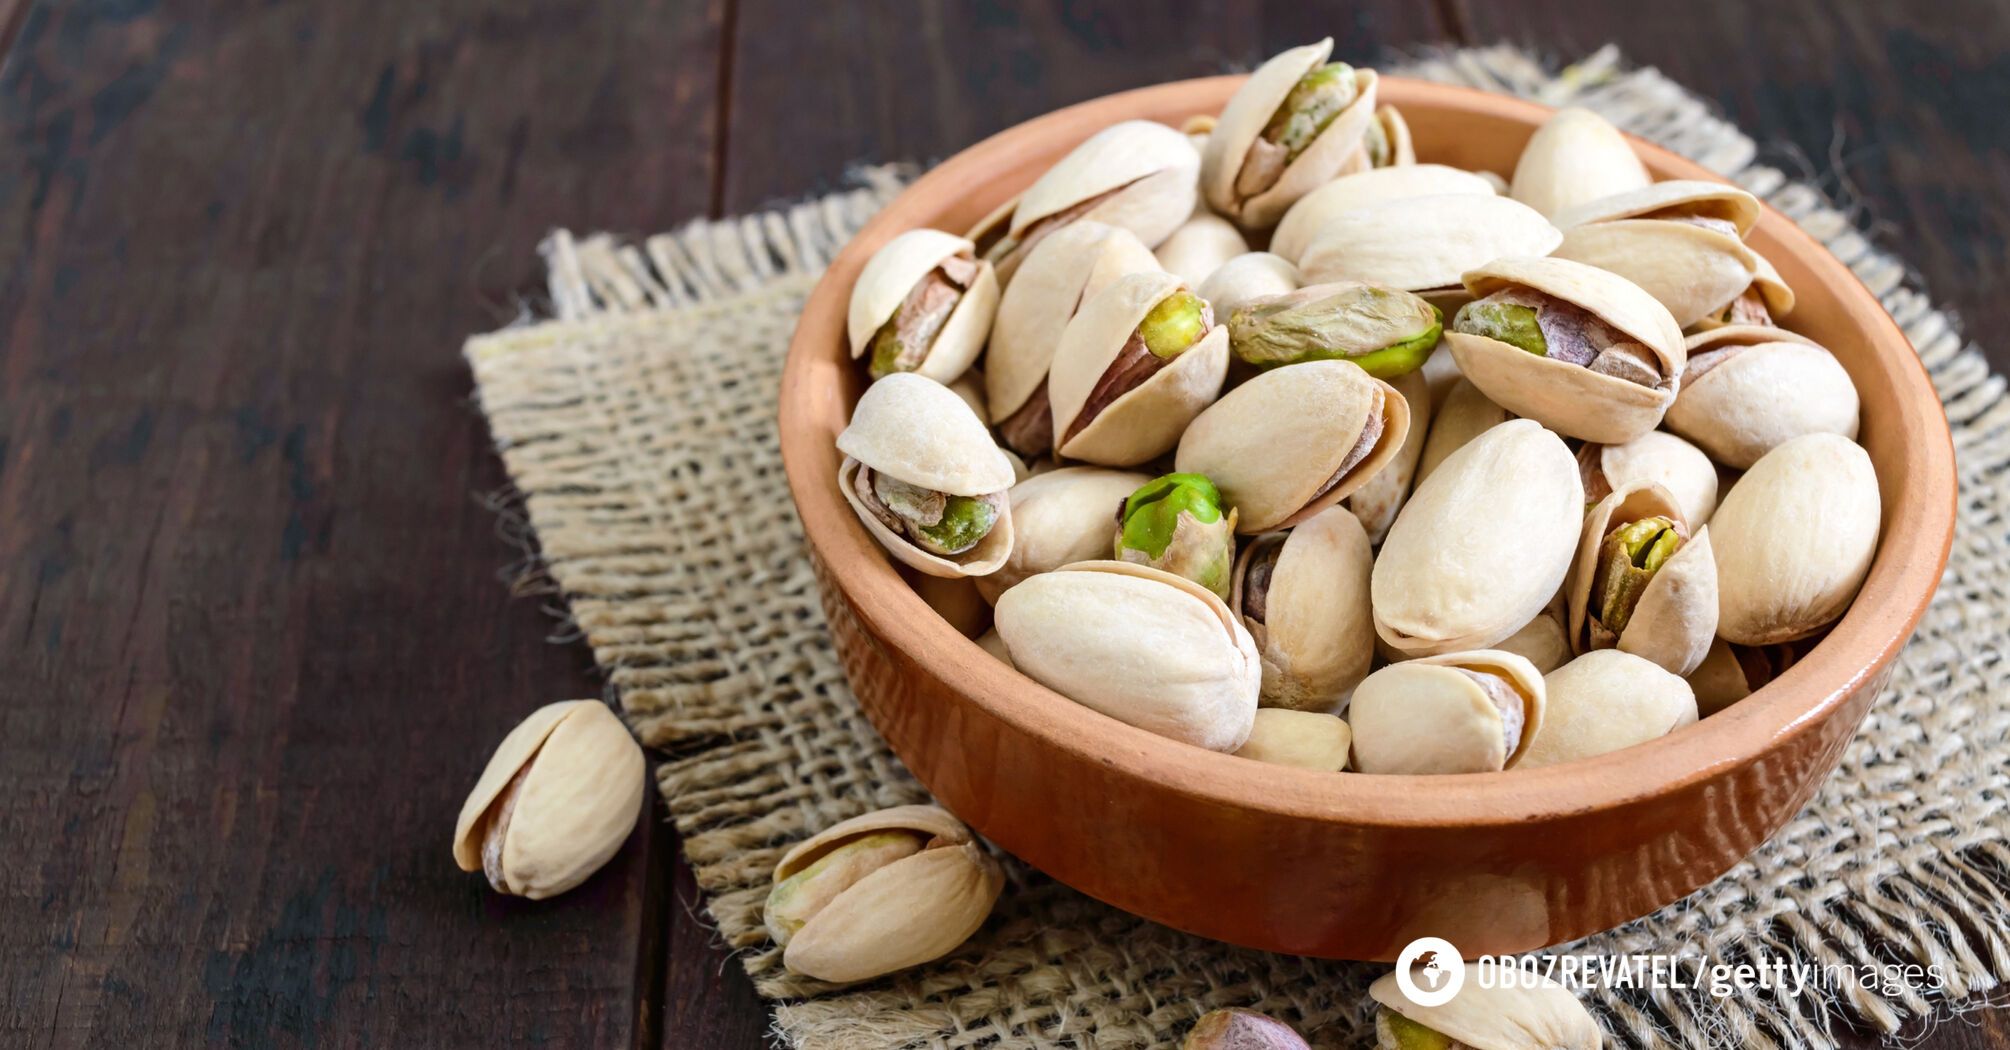 Pistachios are good for heart health